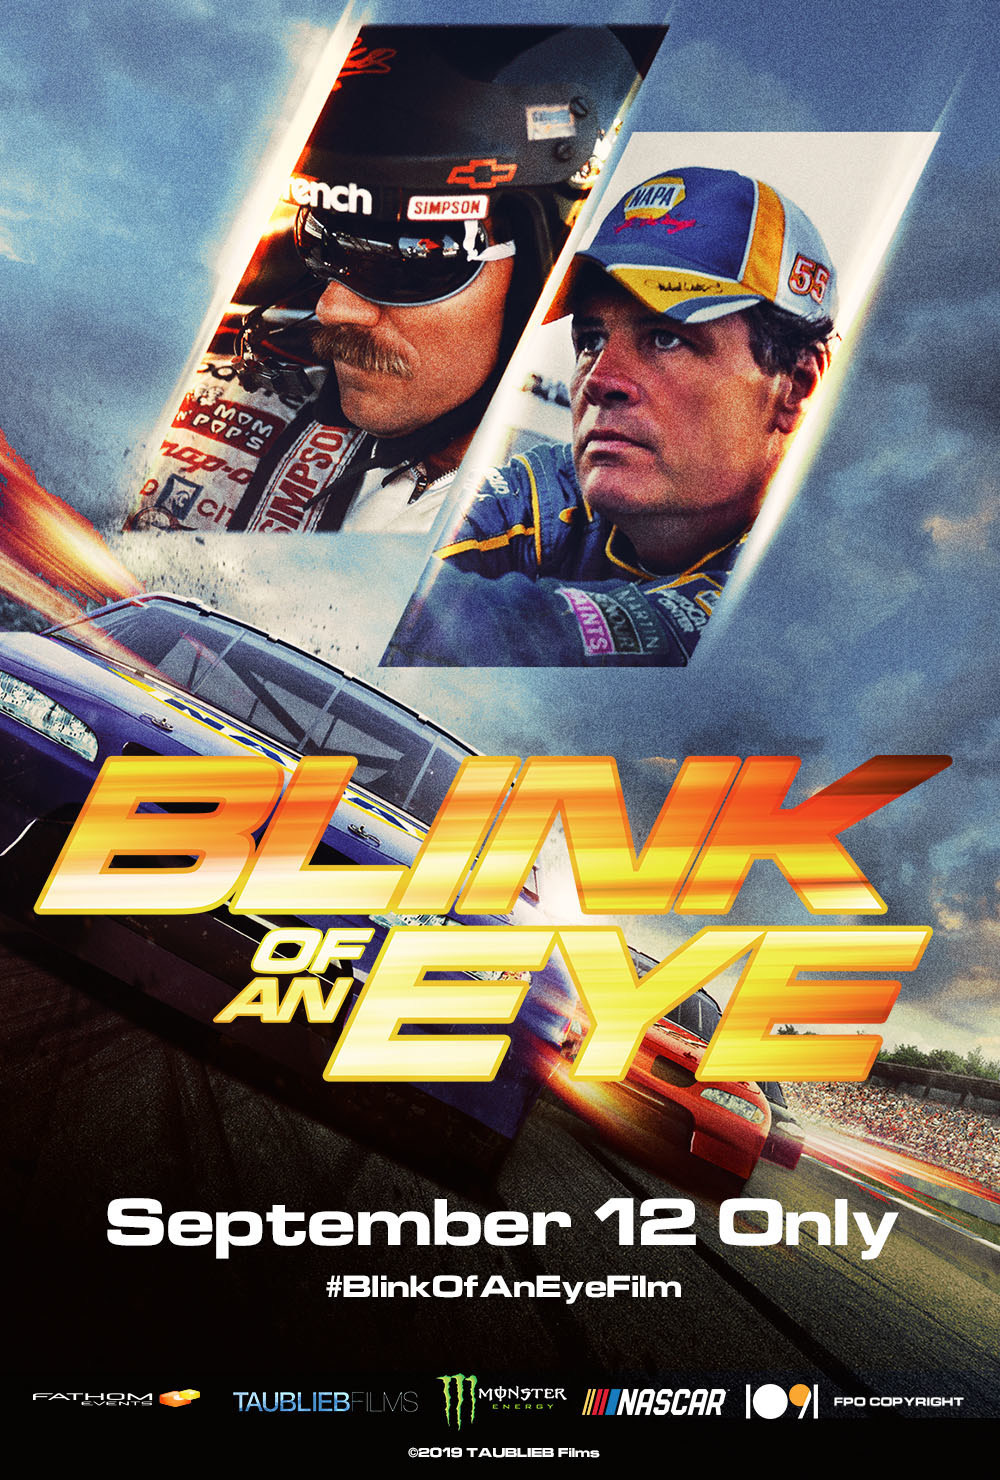 Blink Of An Eye Races Into Select Movie Theaters Nationwide September 12 Only